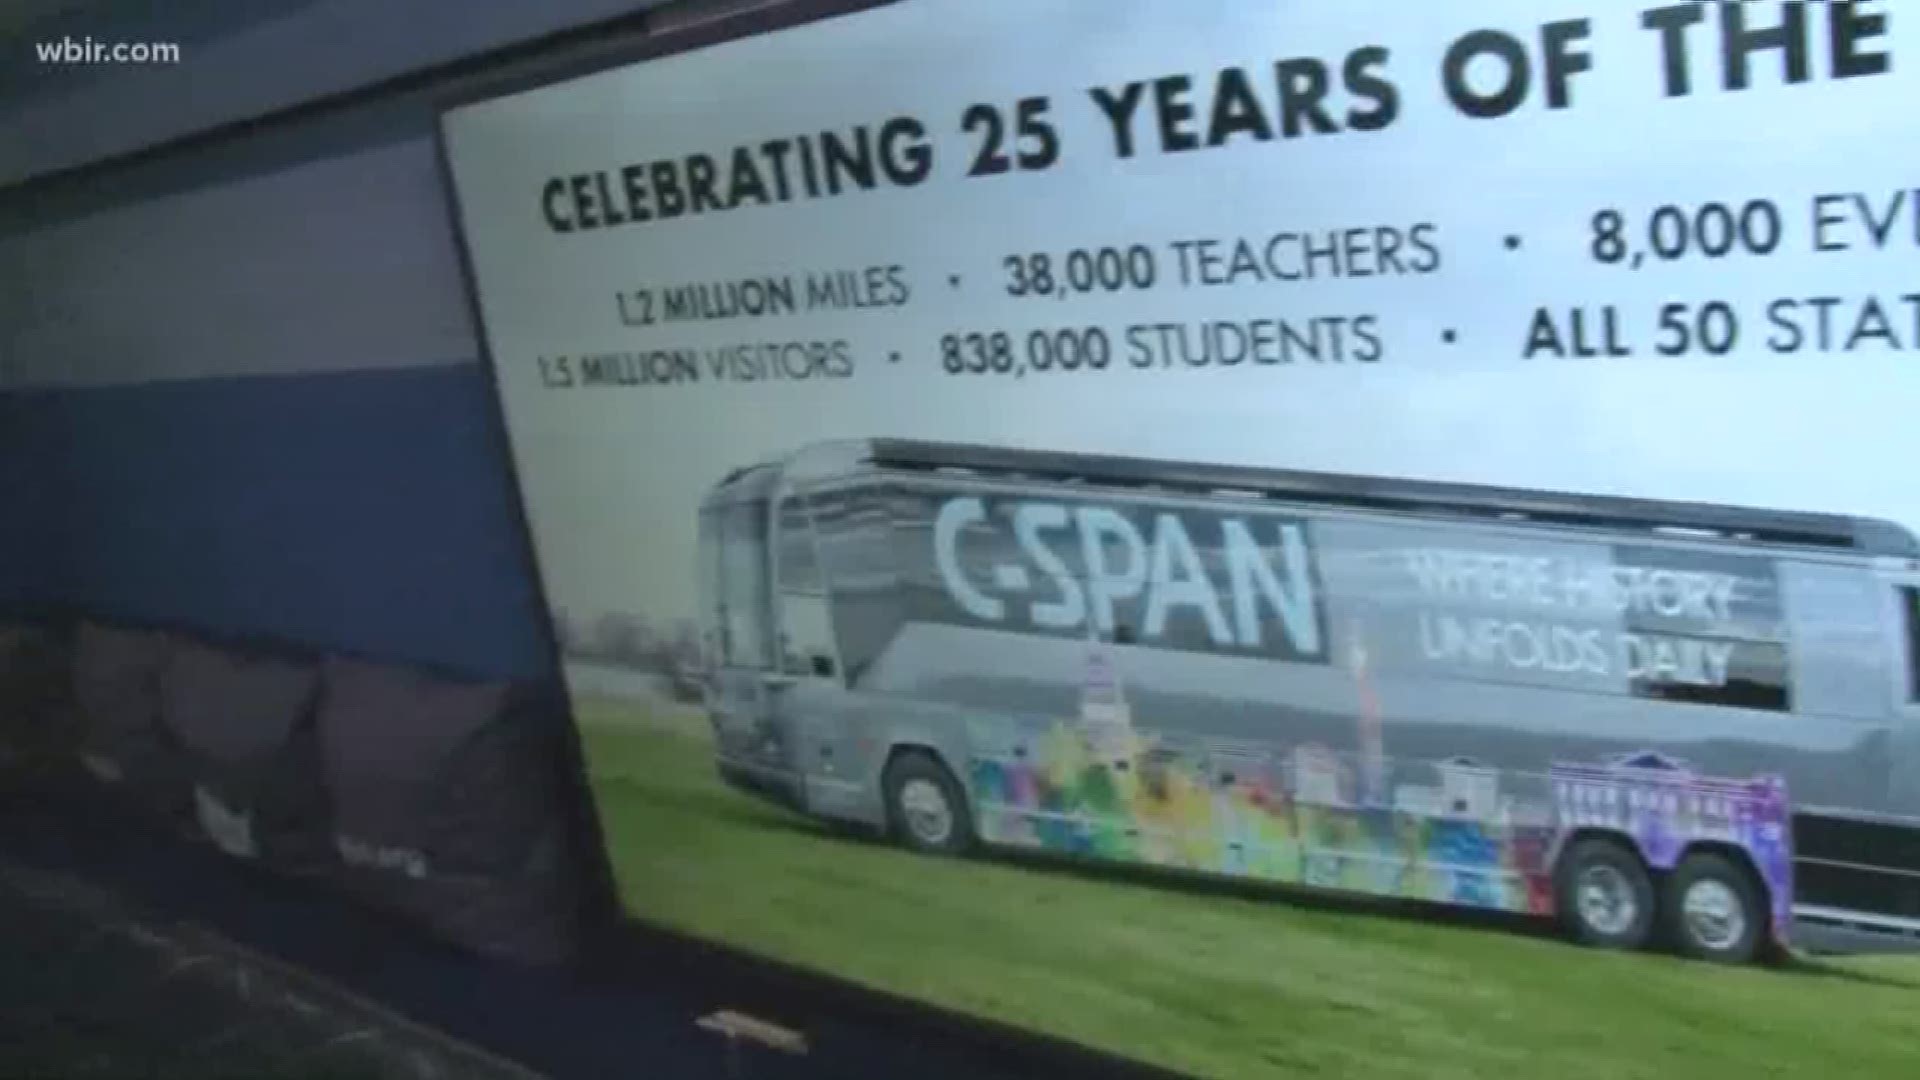 10News Reporter Yvonne Thomas gives us a look inside the bus that will help students learn about politics.